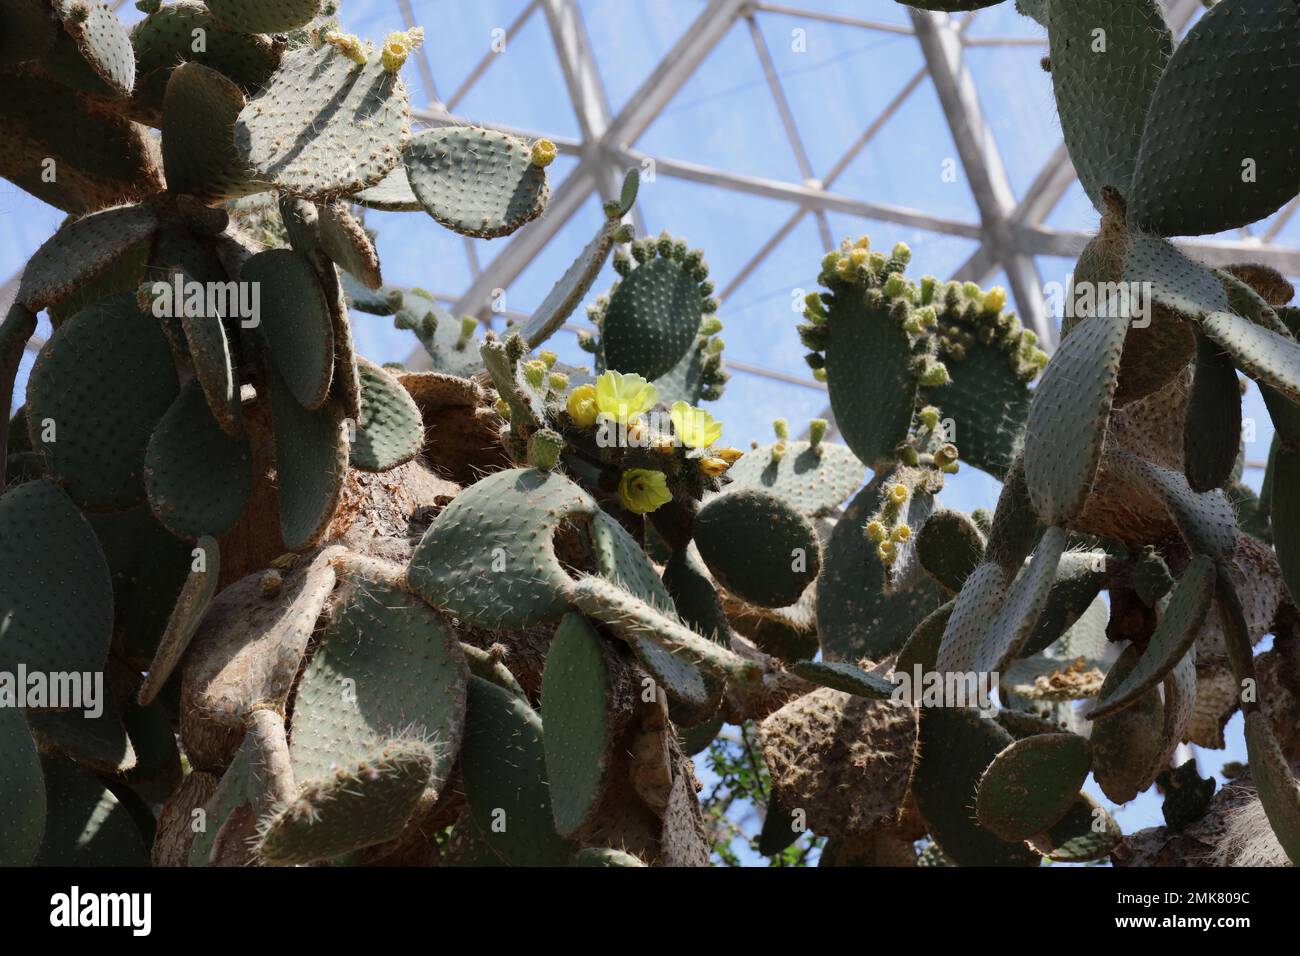 A sprawling Opuntia humifusa, Prickly Pear Cactus, filled with yellow flowers and seed pods in the Desert Room at the Mictchell Park Conservatory in M Stock Photo